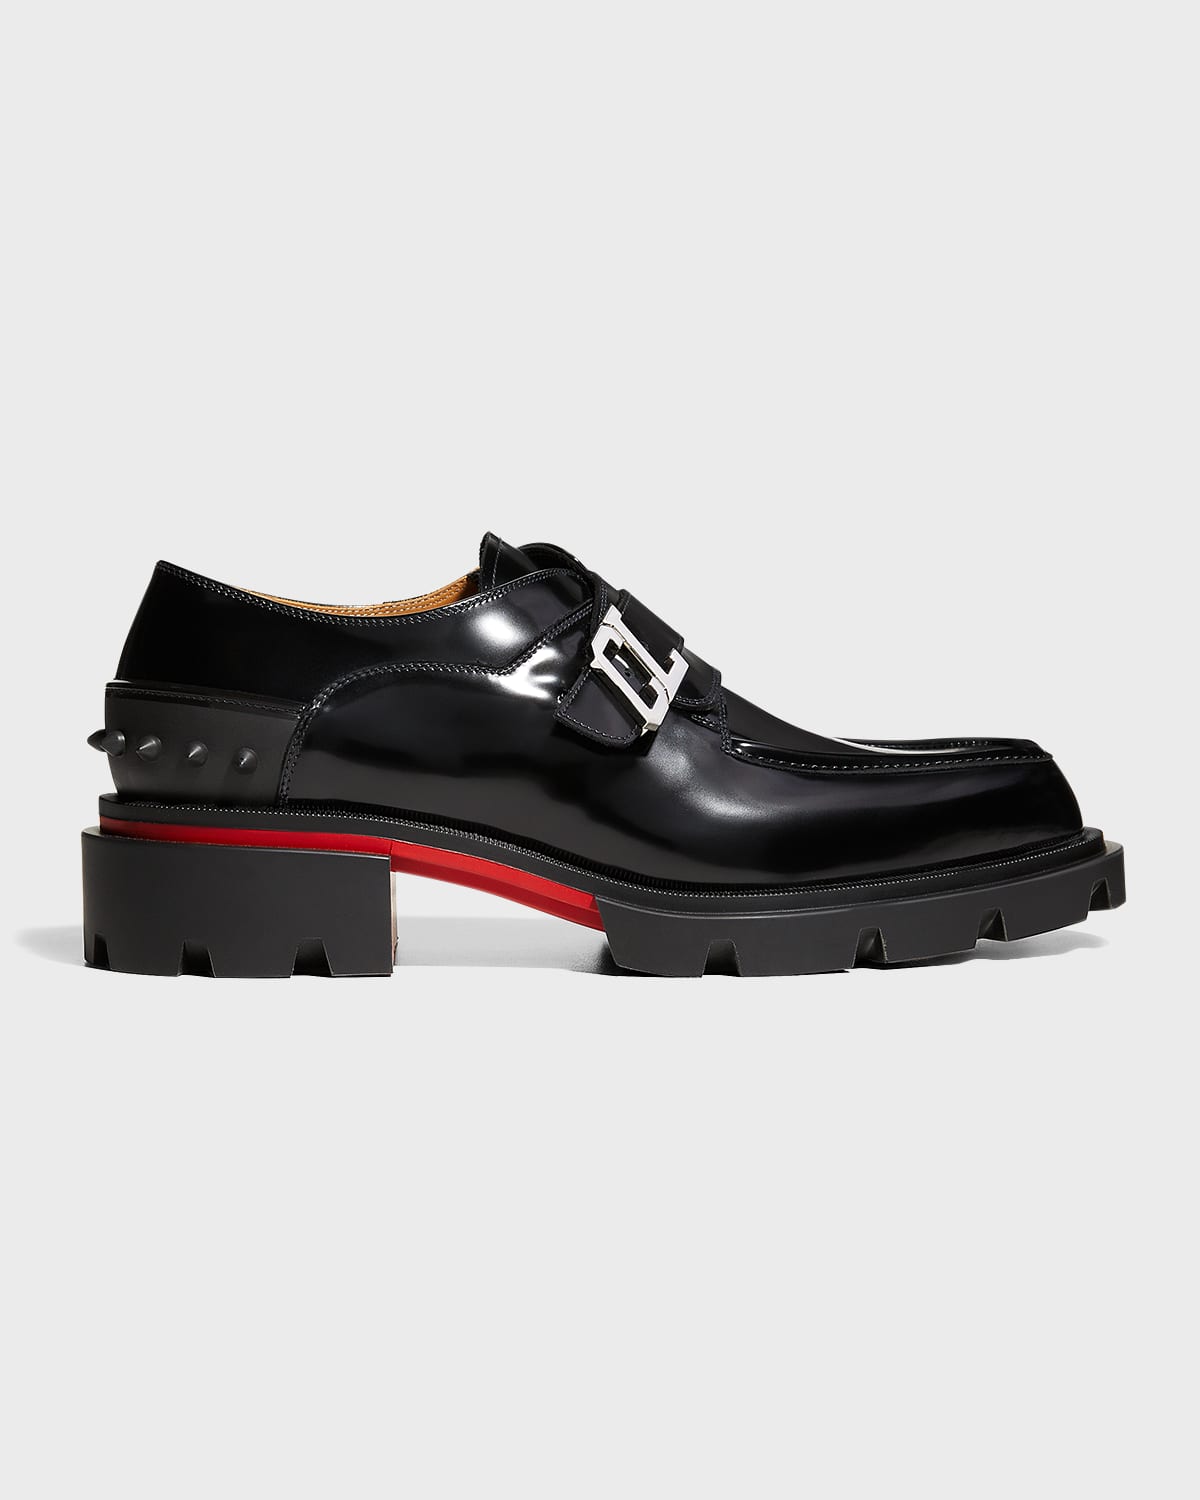 annoncere medarbejder Squeak Christian Louboutin Men's No Penny Patent Leather Penny Loafers | Neiman  Marcus